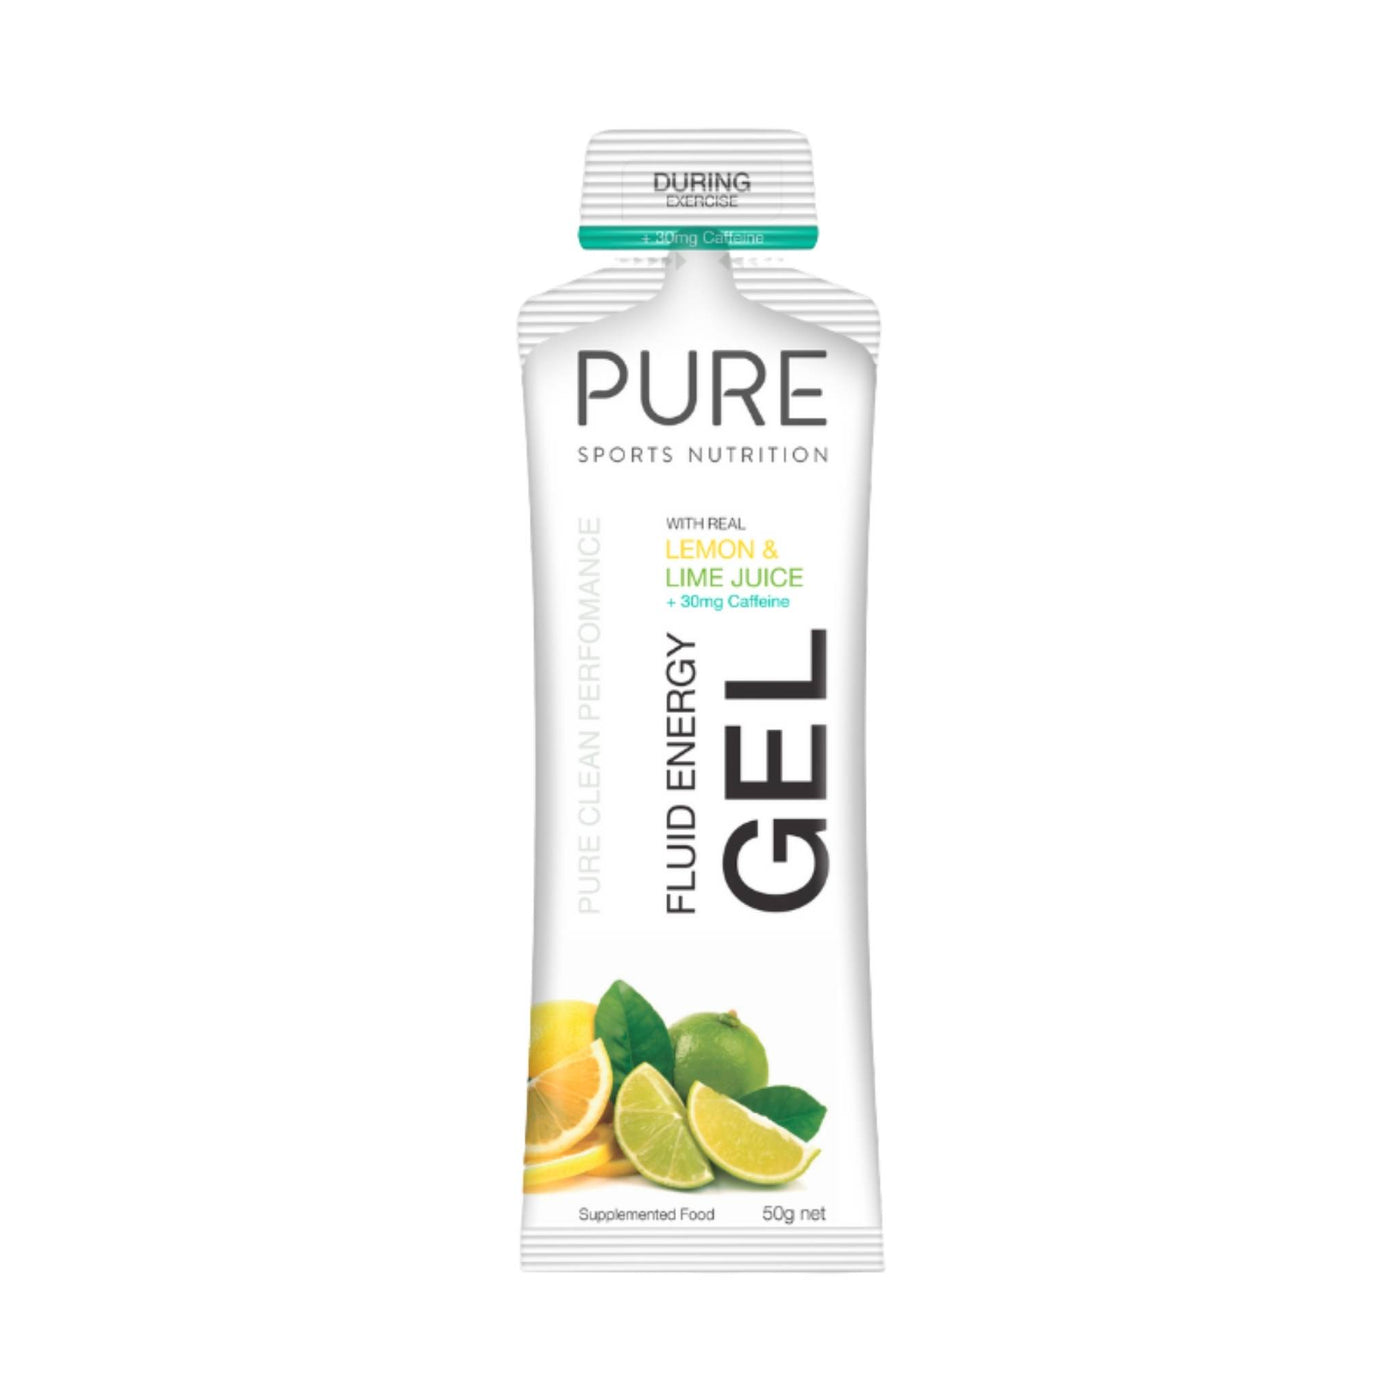 Pure Fluid Energy Gels | Sports Gels and NutritionPure Fluid Energy Gels | Sports Gels and Nutrition | Further Faster Christchurch NZ | Lemon & Lime Juice + Caffeine